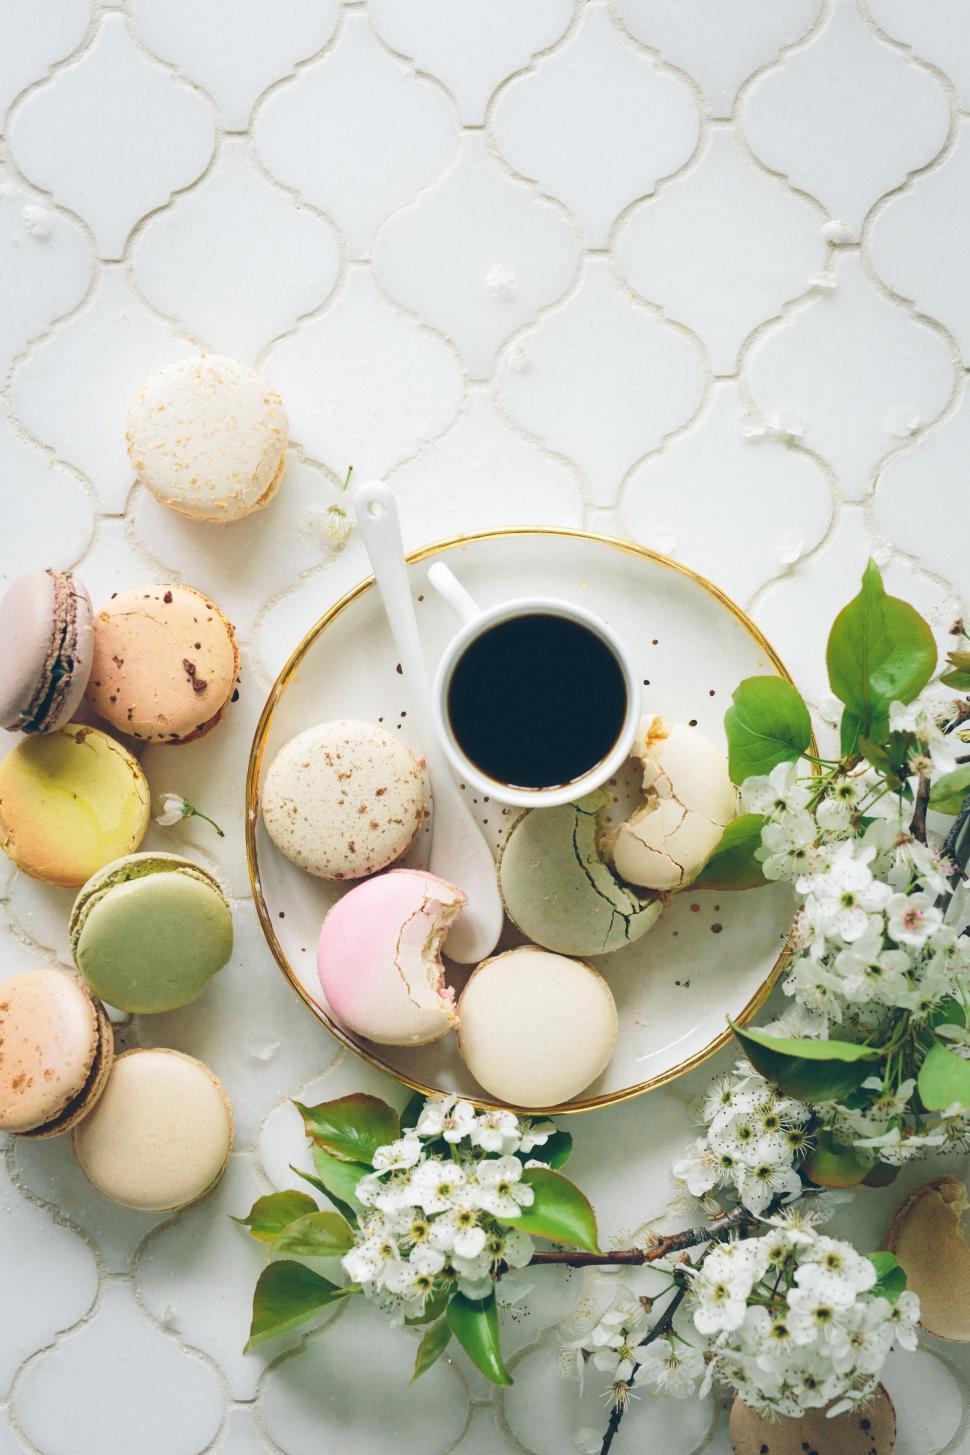 Free Image of A Cup of Coffee Next to a Plate of Macaroons 